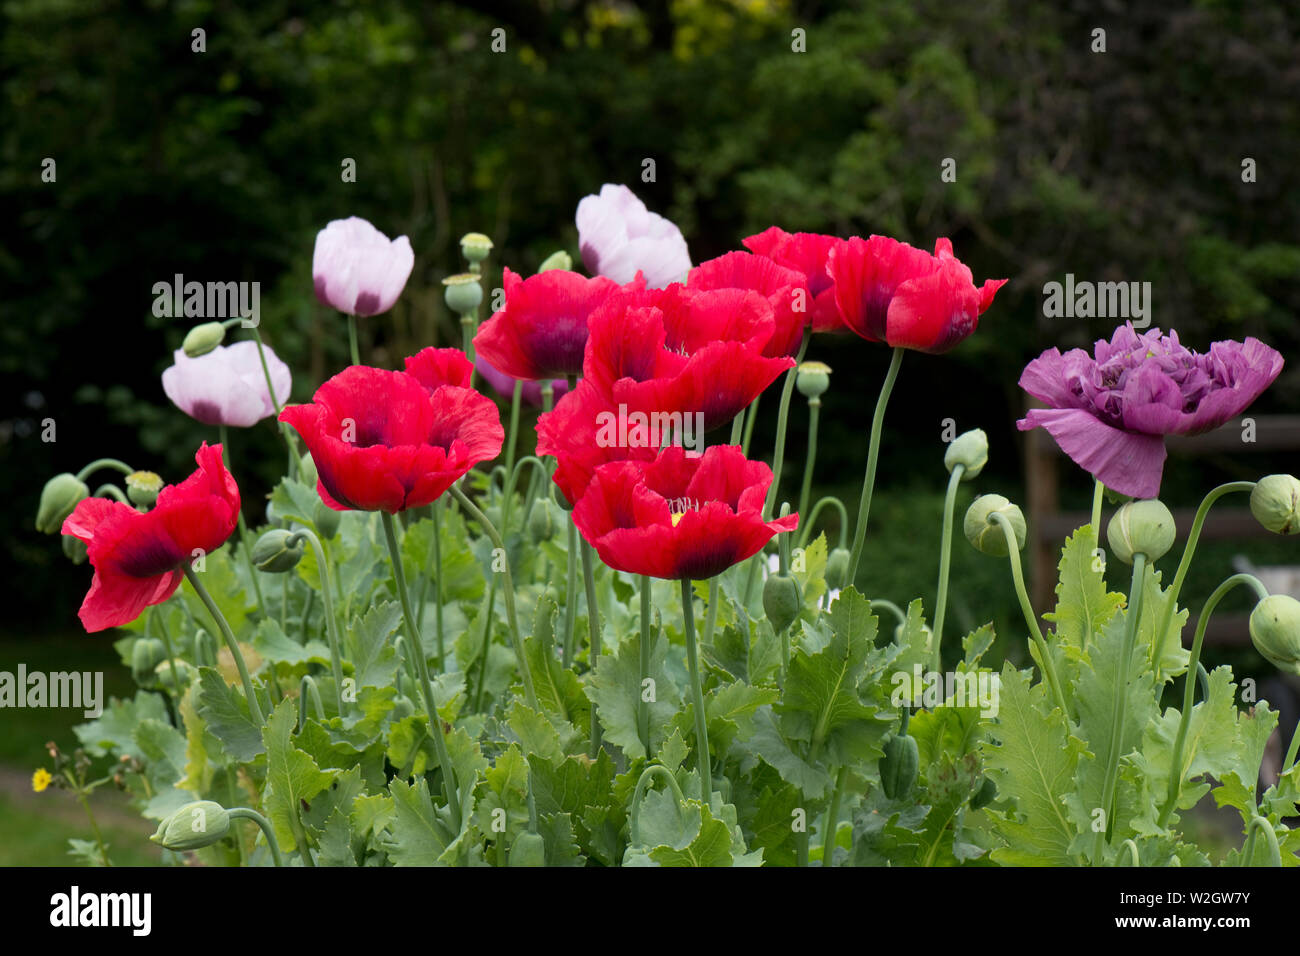 red, white and purple opium poppies, Papaver somniferum, brightly coloured flowers of this annnual poppy in a country garden, June Stock Photo